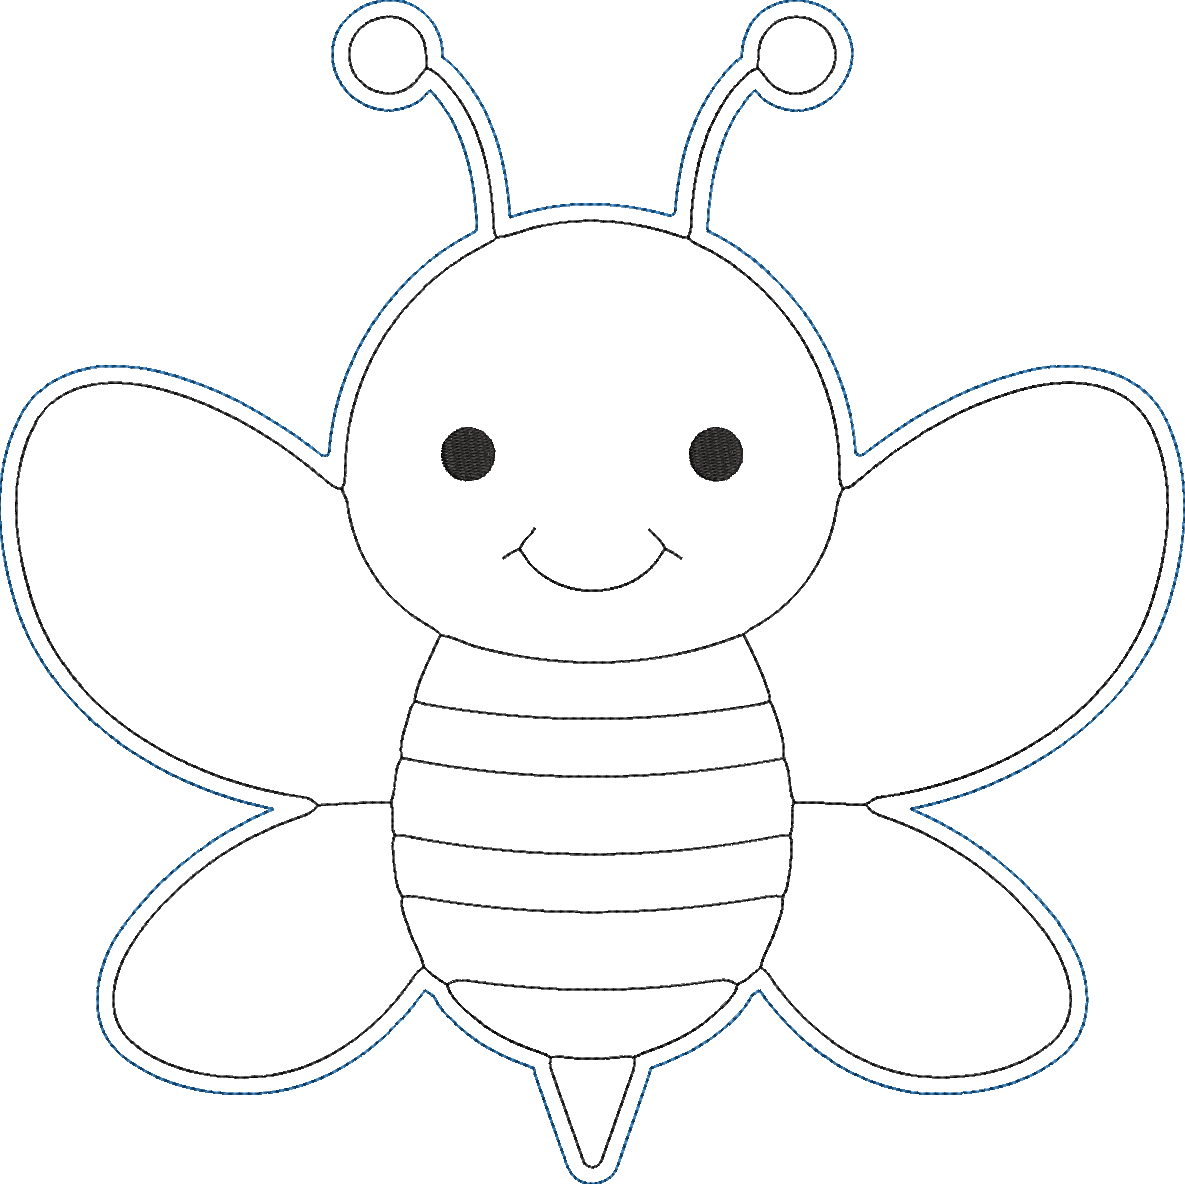 Bug Coloring Dolls - bee Embroidery Design